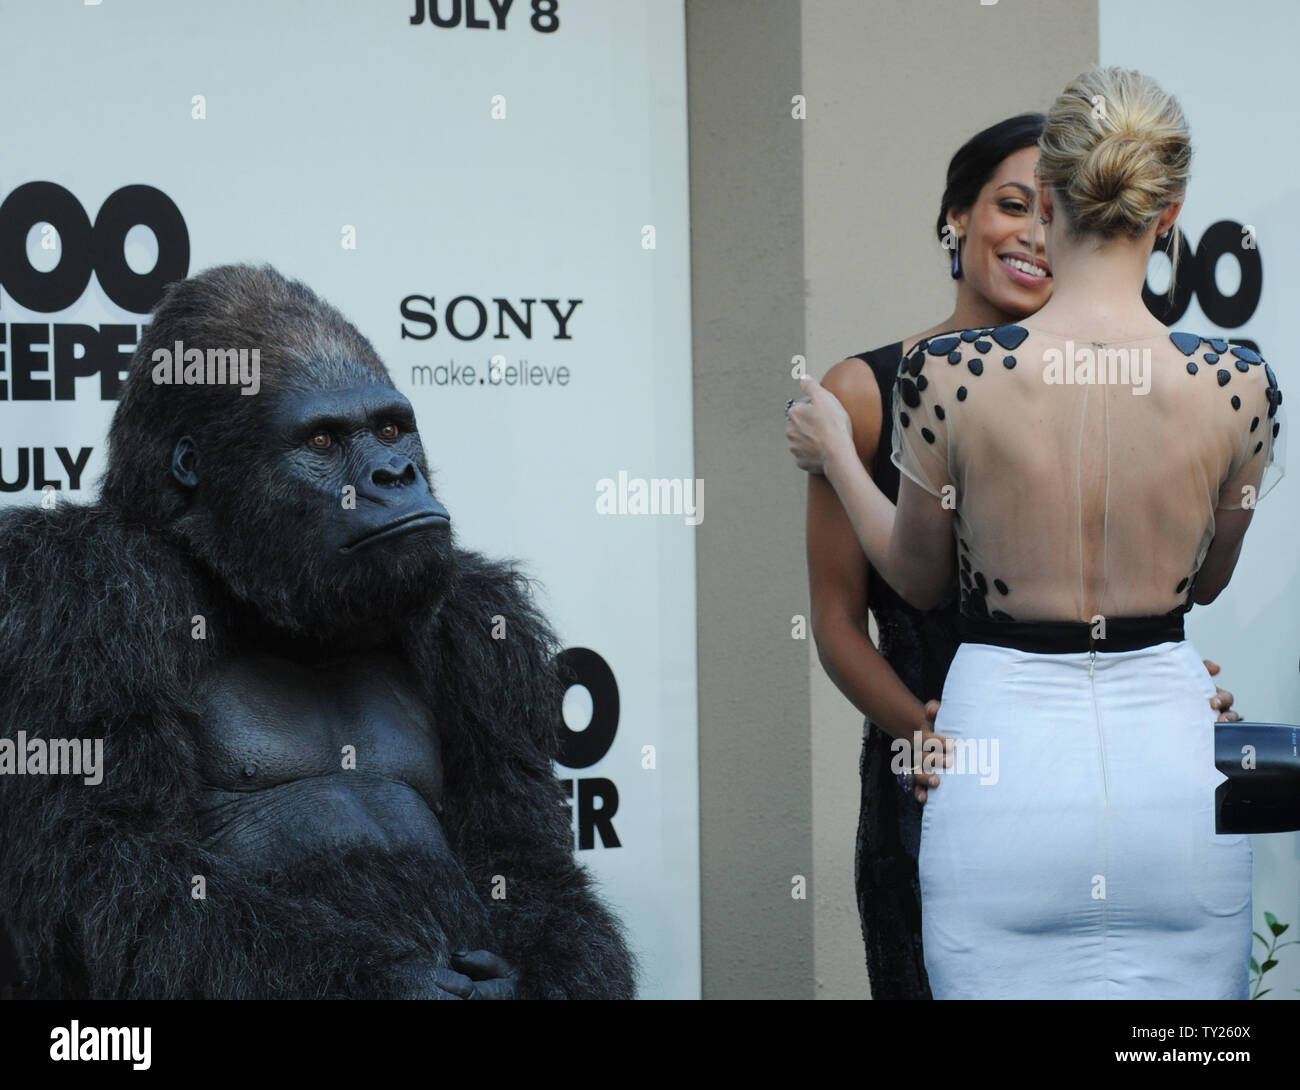 Rosario Dawson (L) and Leslie Bibb, cast members in the motion picture romantic comedy 'Zookeeper', greet each other at the premiere of the film, as an actor in a gorilla costume looks on in Los Angeles on July 6, 2011. UPI/Jim Ruymen Stock Photo